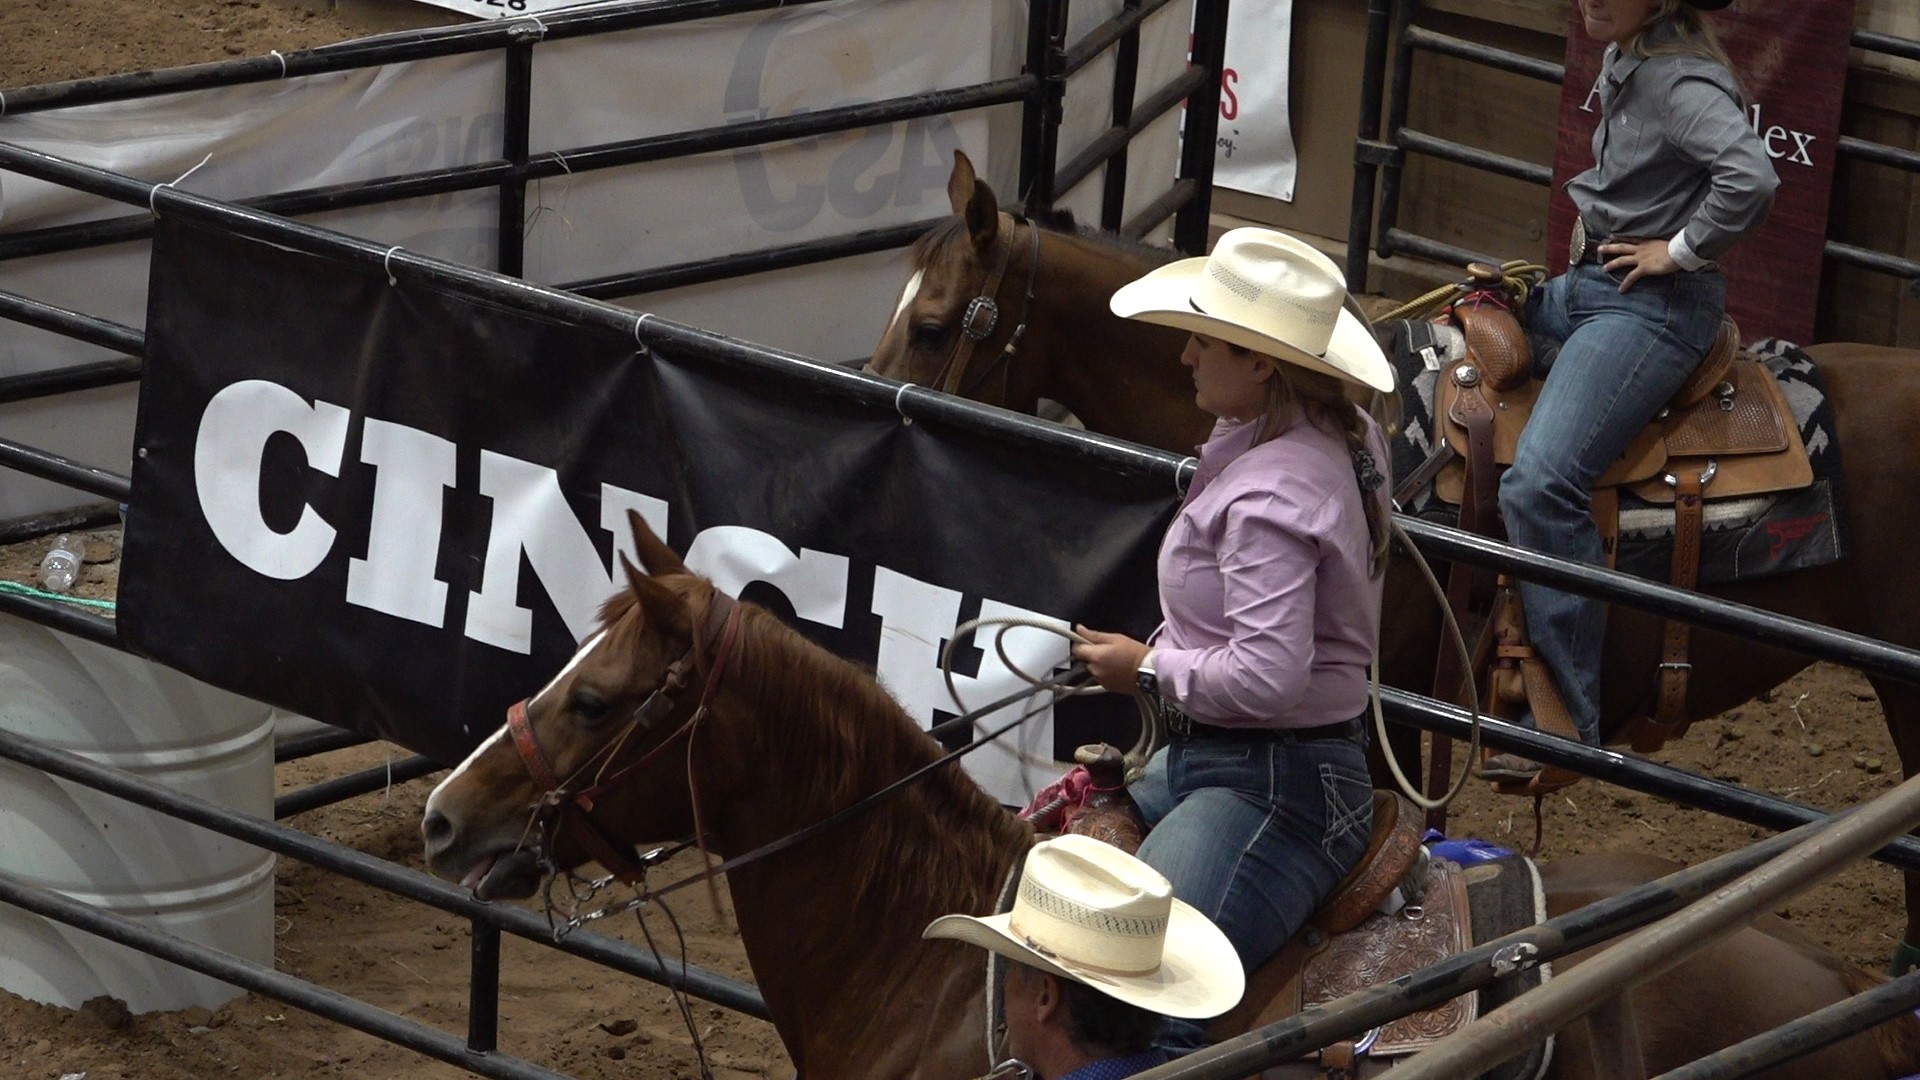 The San Angelo Rodeo was founded in 1932. Breakaway ropers have not competed at the event until 2024.